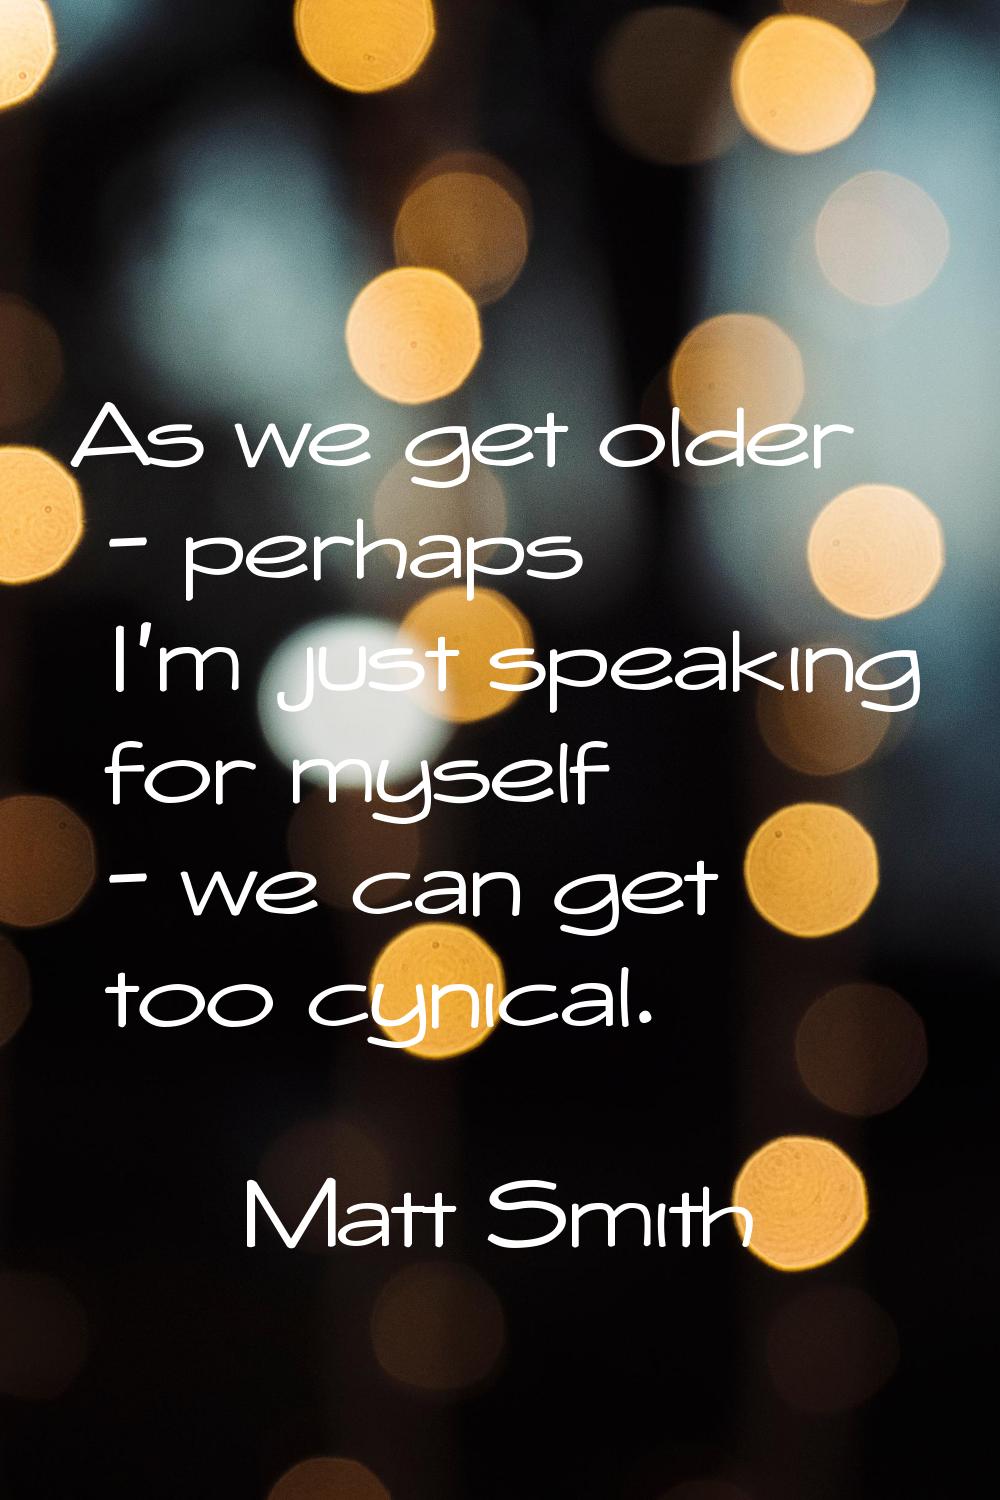 As we get older - perhaps I'm just speaking for myself - we can get too cynical.